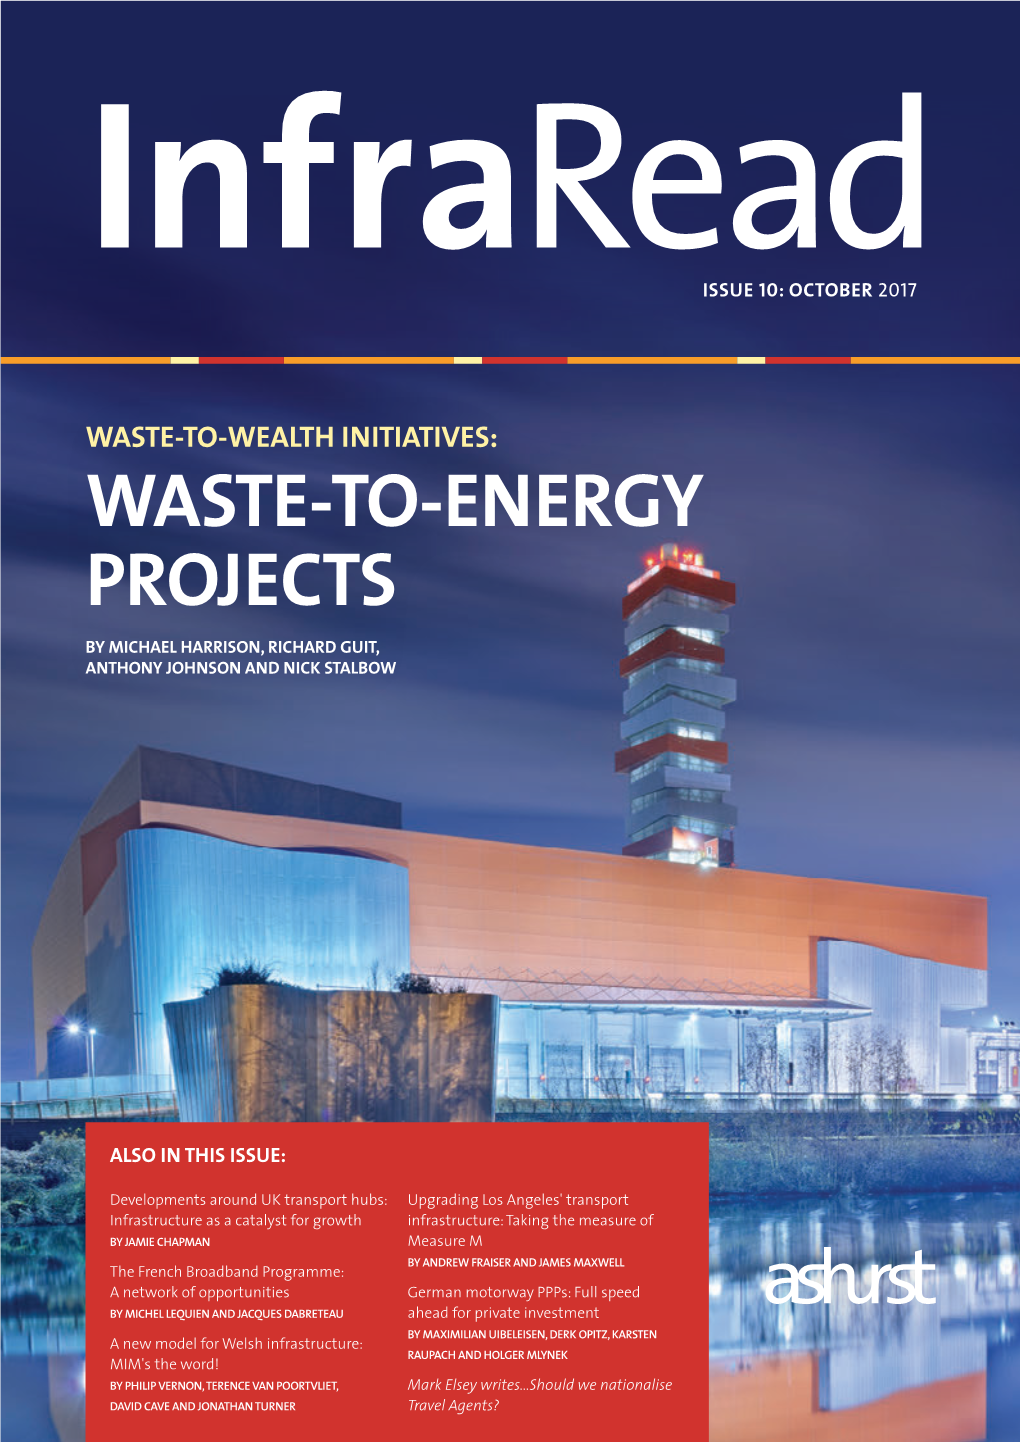 Infraread Issue 10 PDF 2.71 MB